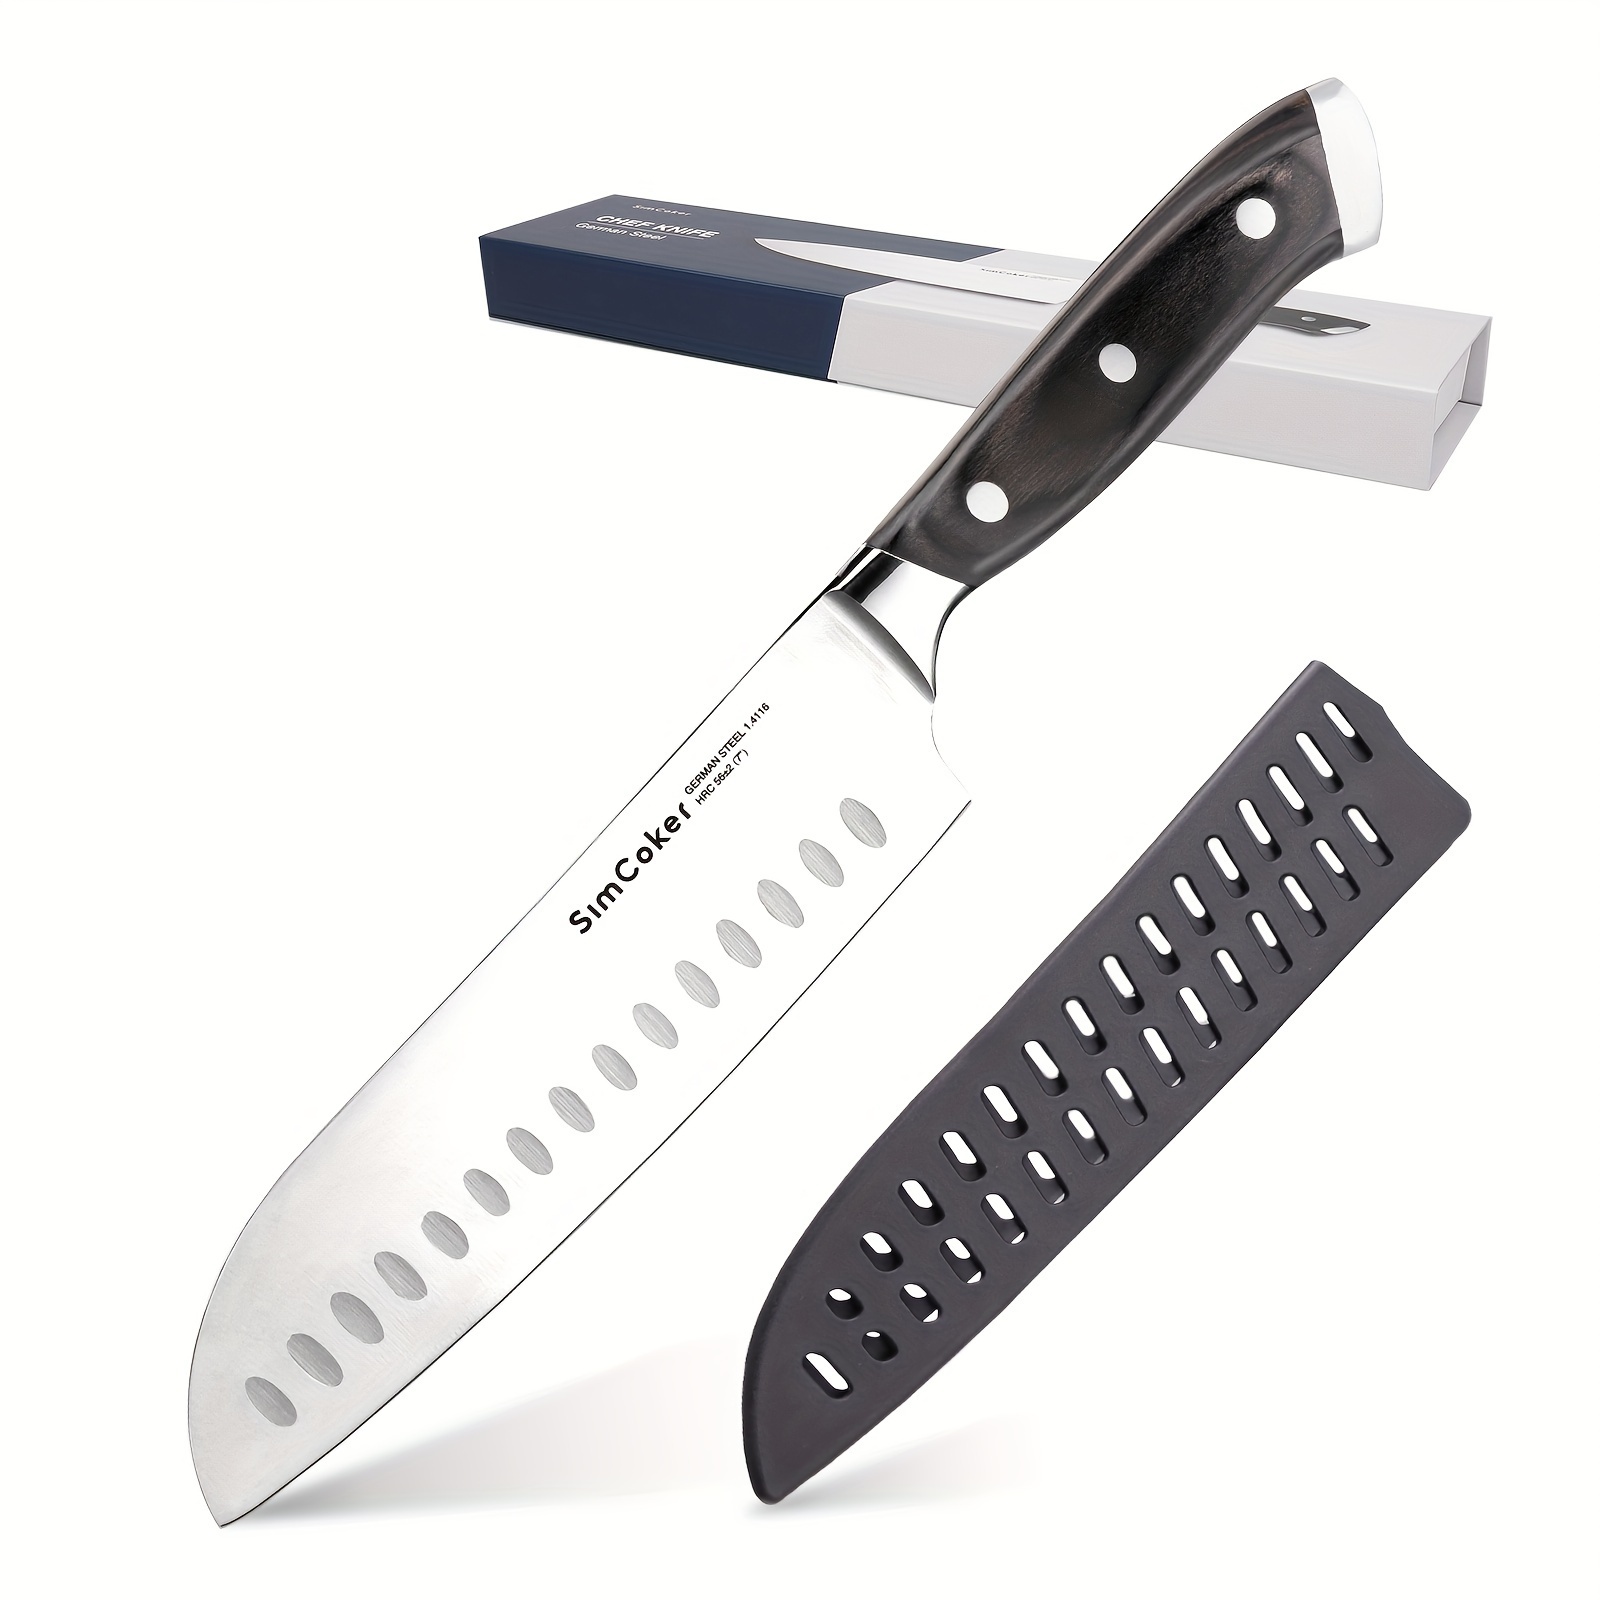 

Santoku Knife 7 Inch, Cutting Knife, Sharp Kitchen Knives With Sheath, German High Carbon Stainless Steel En1.4116, Chef Knife With Ergonomic Pakkawood Handle